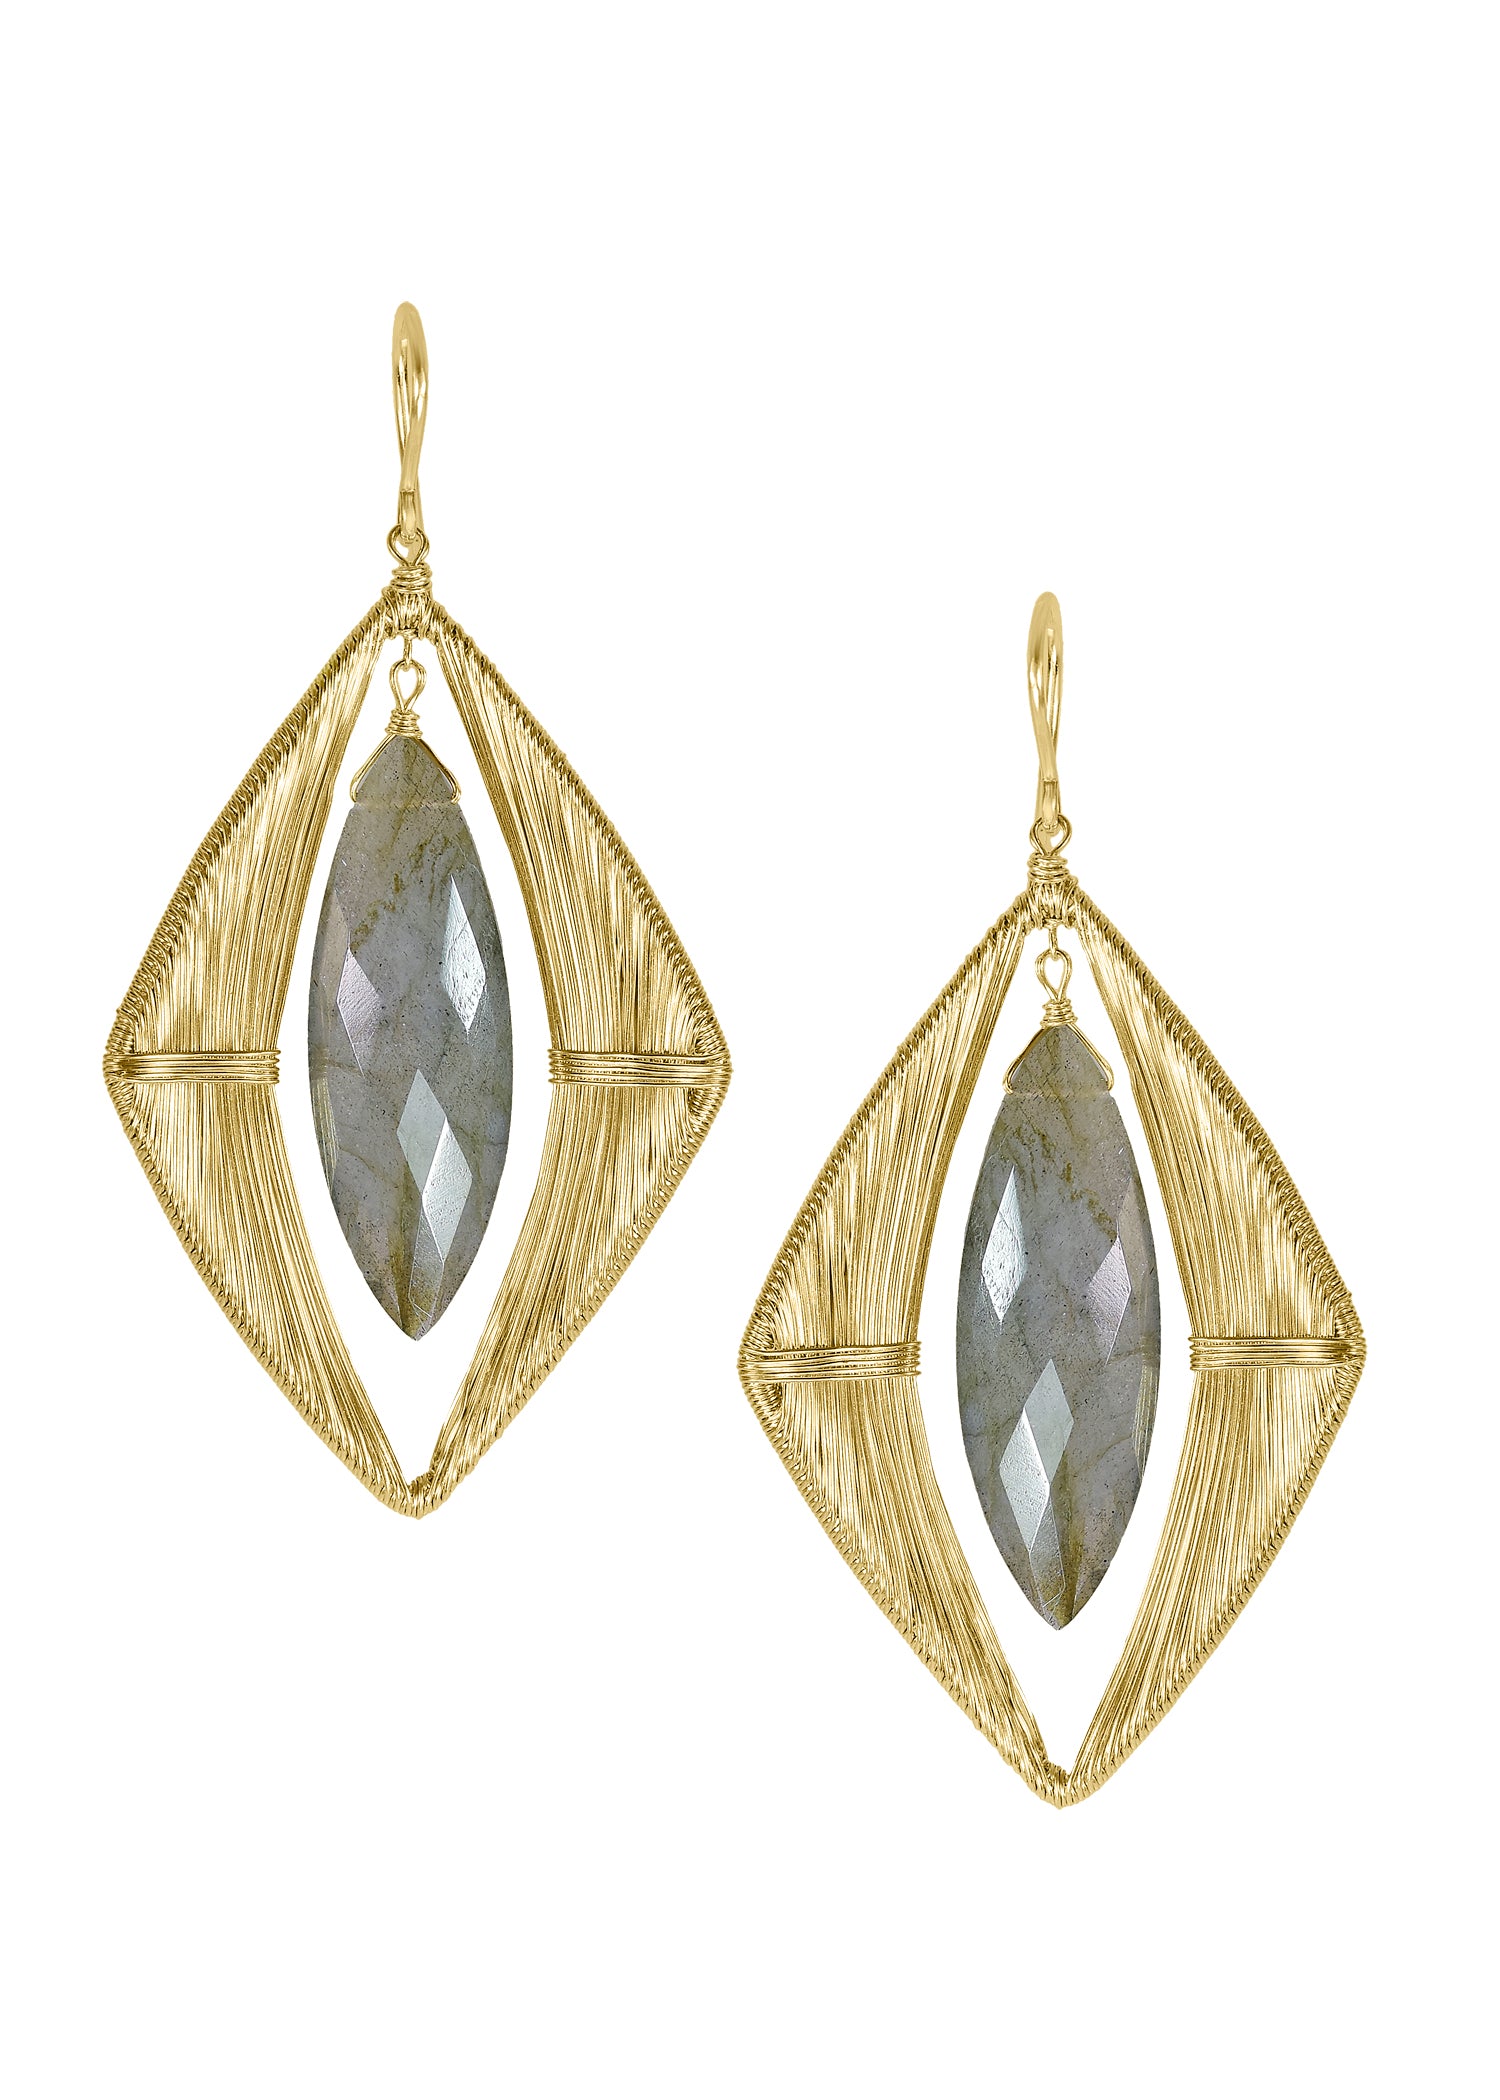 Labradorite 14k gold fill Earrings measure 2-1/4" in length (including the ear wires) and 1-1/4" in width at the widest point Handmade in our Los Angeles studio